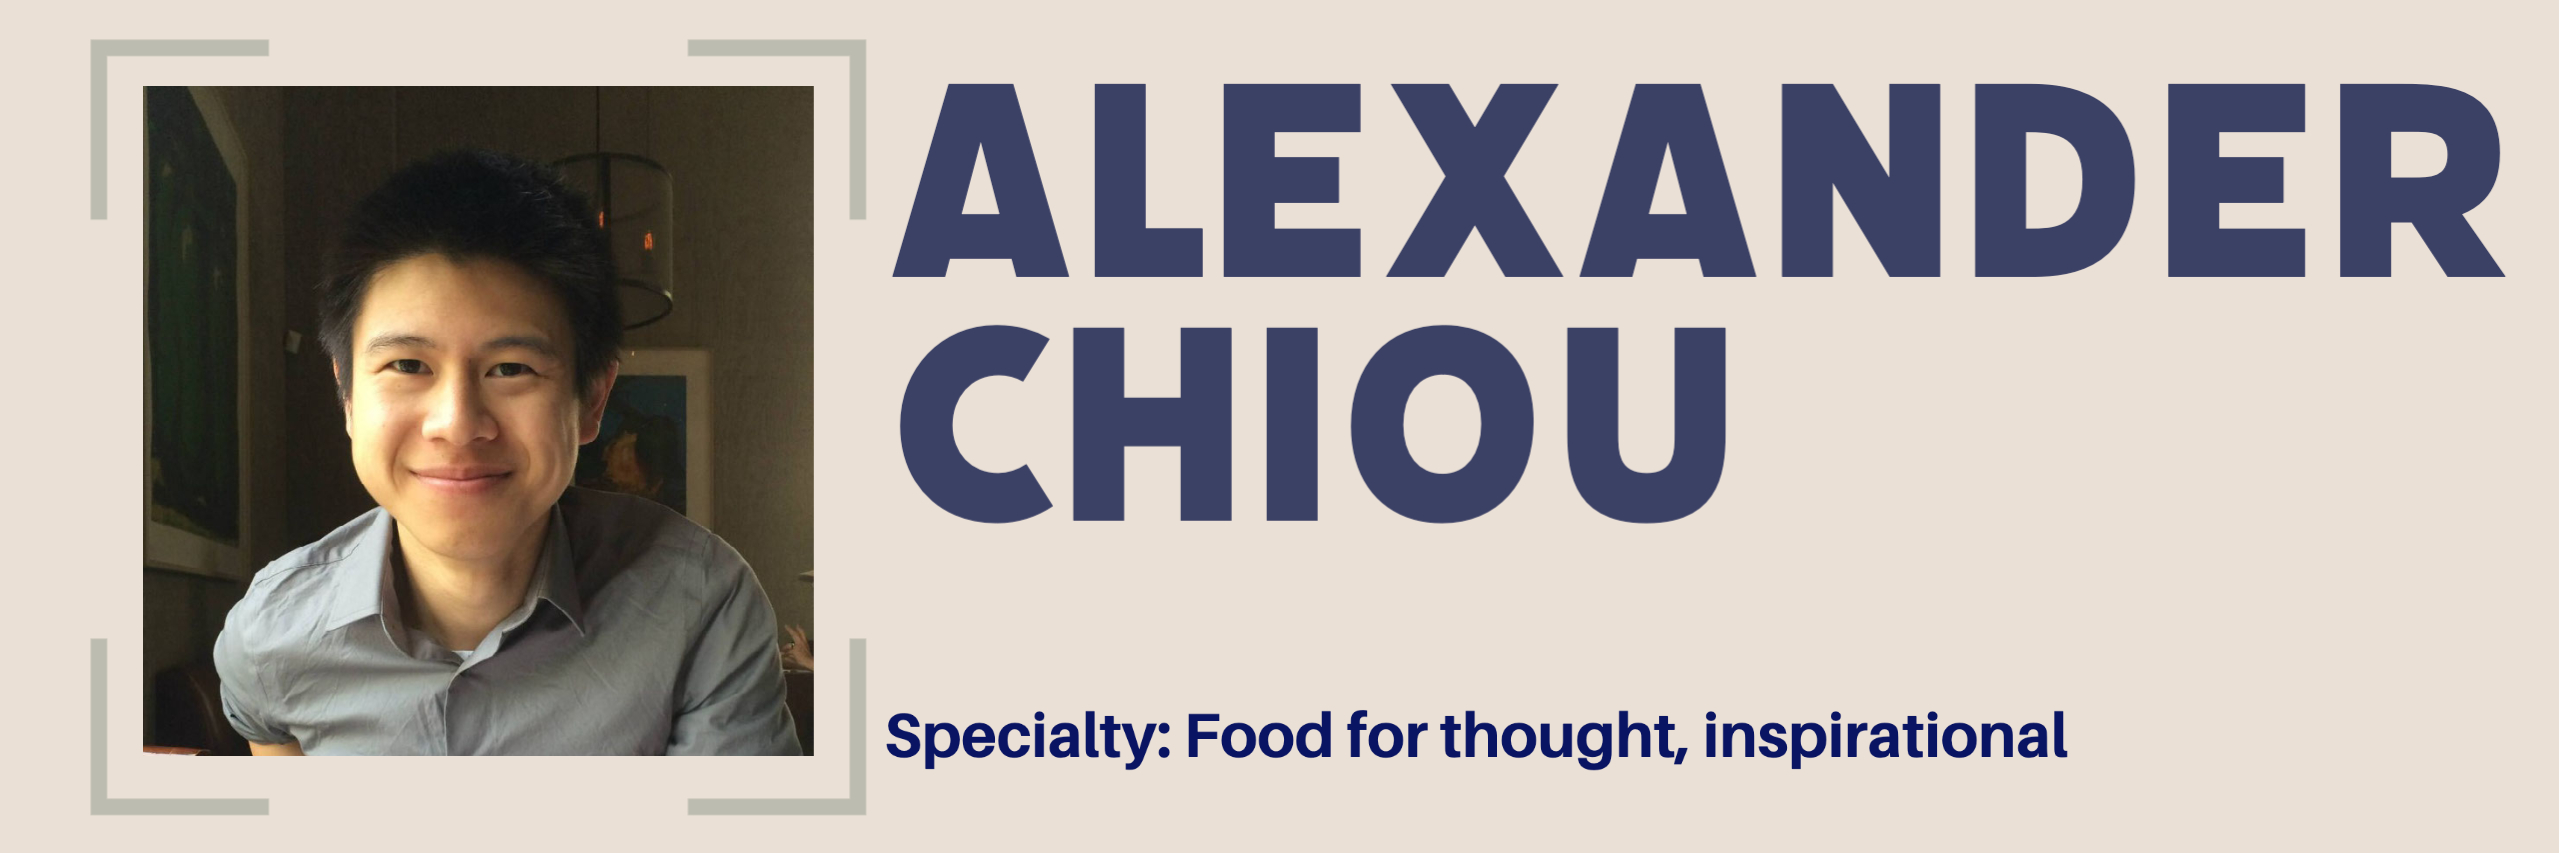 Alexander Chiou gives amazing advice on his LinkedIn feed constantly which is exactly why he makes our list